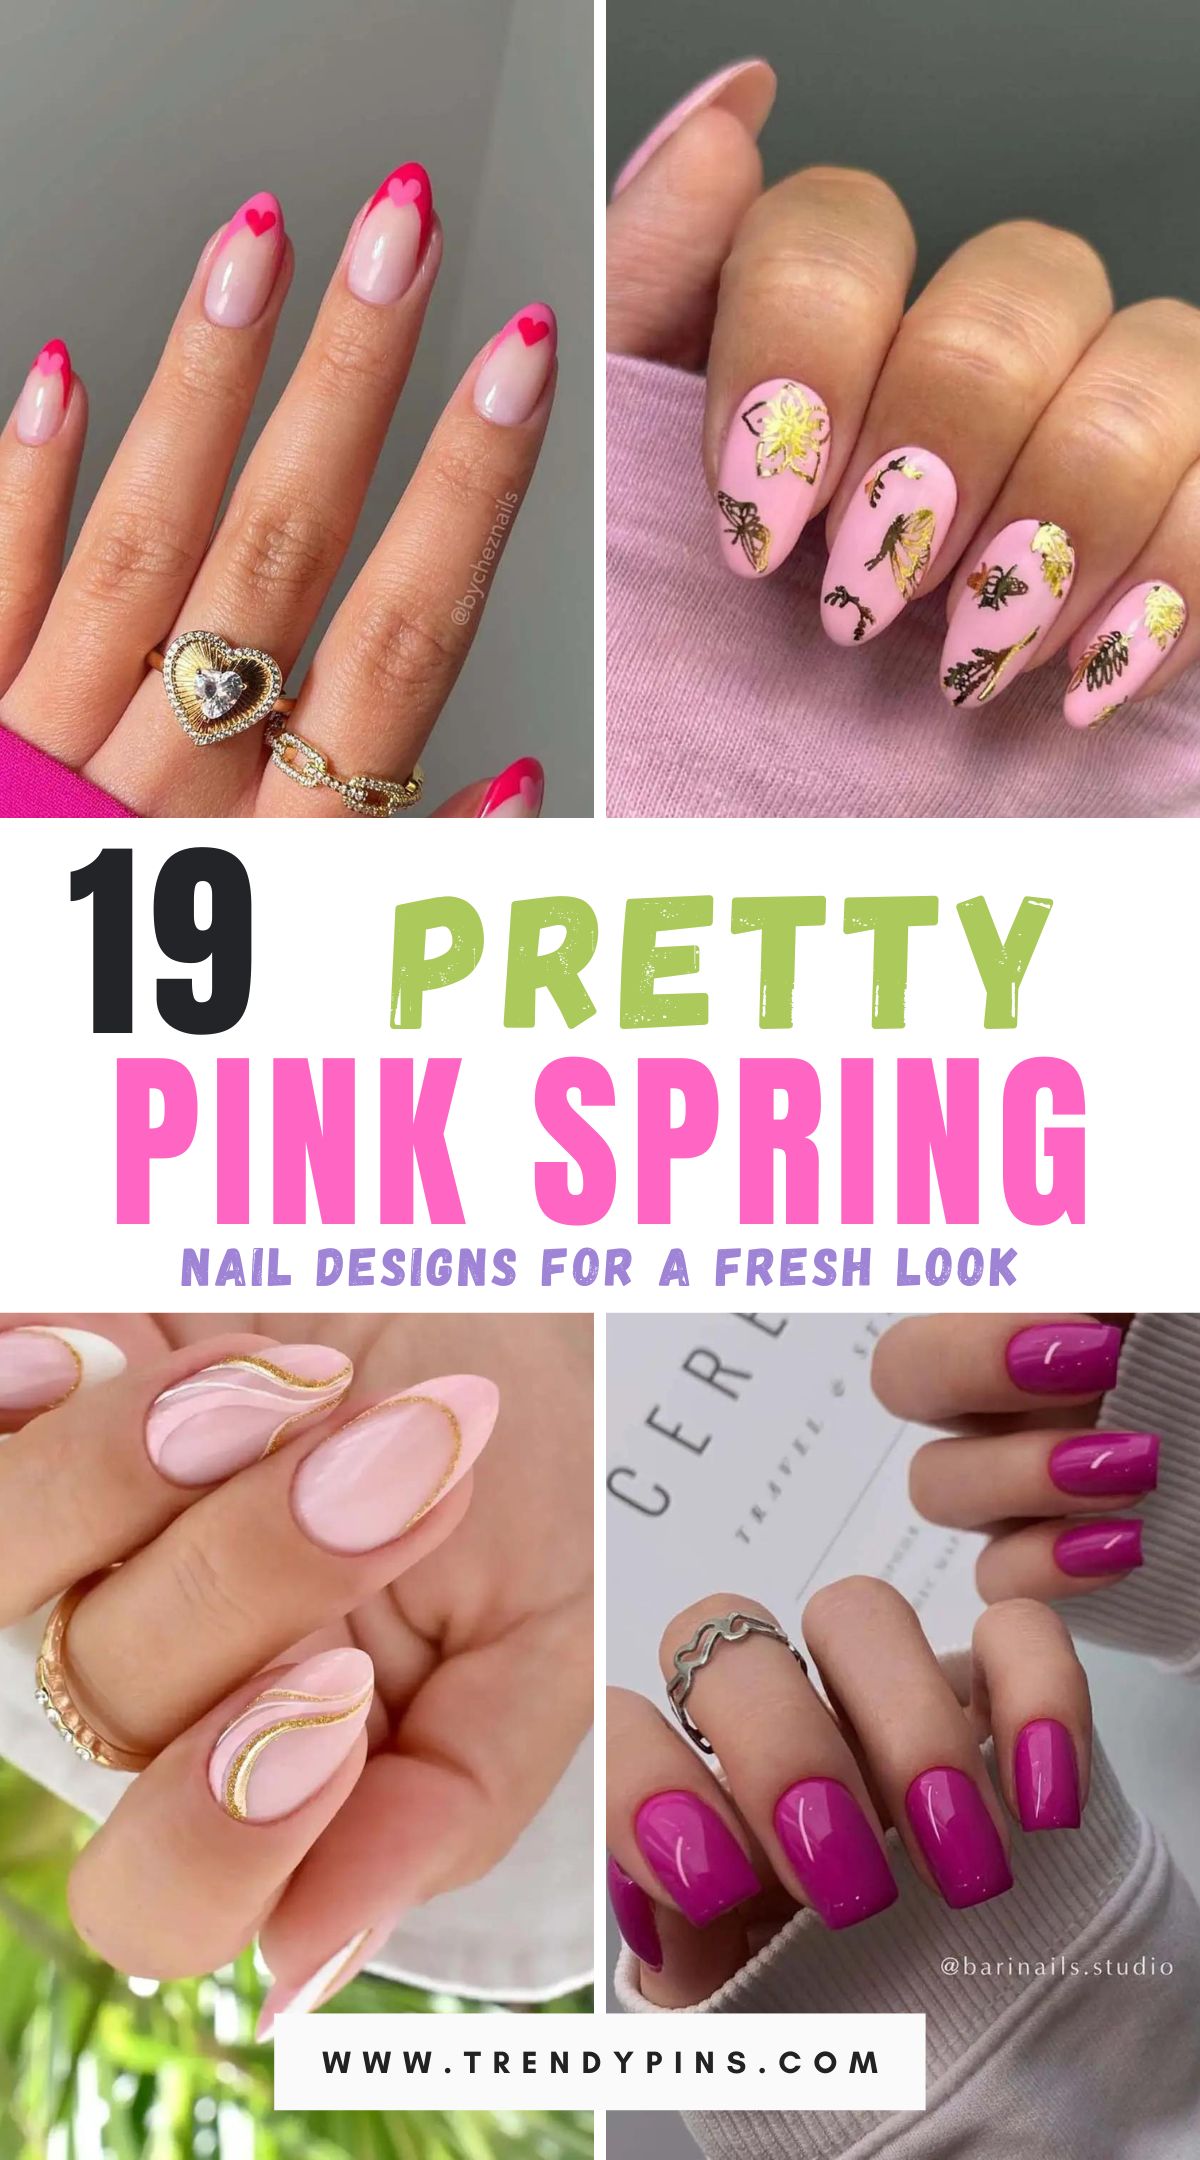 Elevate your spring nail game with these 19 pink-themed designs. Embrace the freshness and vibrancy of the season with creative and stylish nail art ideas that add a touch of pink elegance to your look.